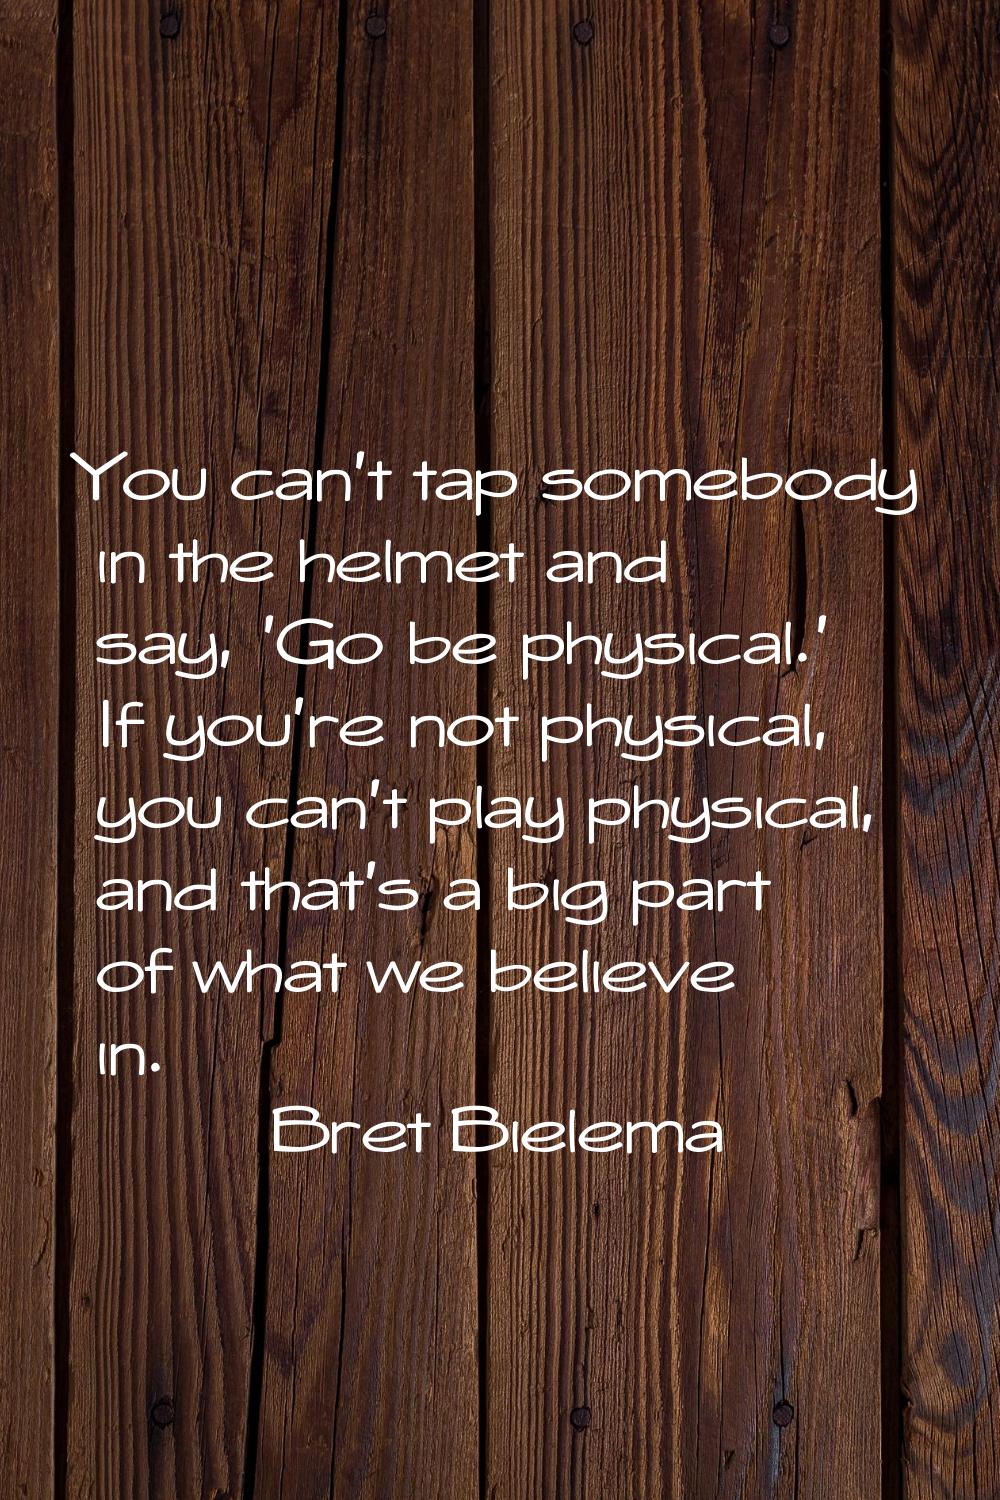 You can't tap somebody in the helmet and say, 'Go be physical.' If you're not physical, you can't p